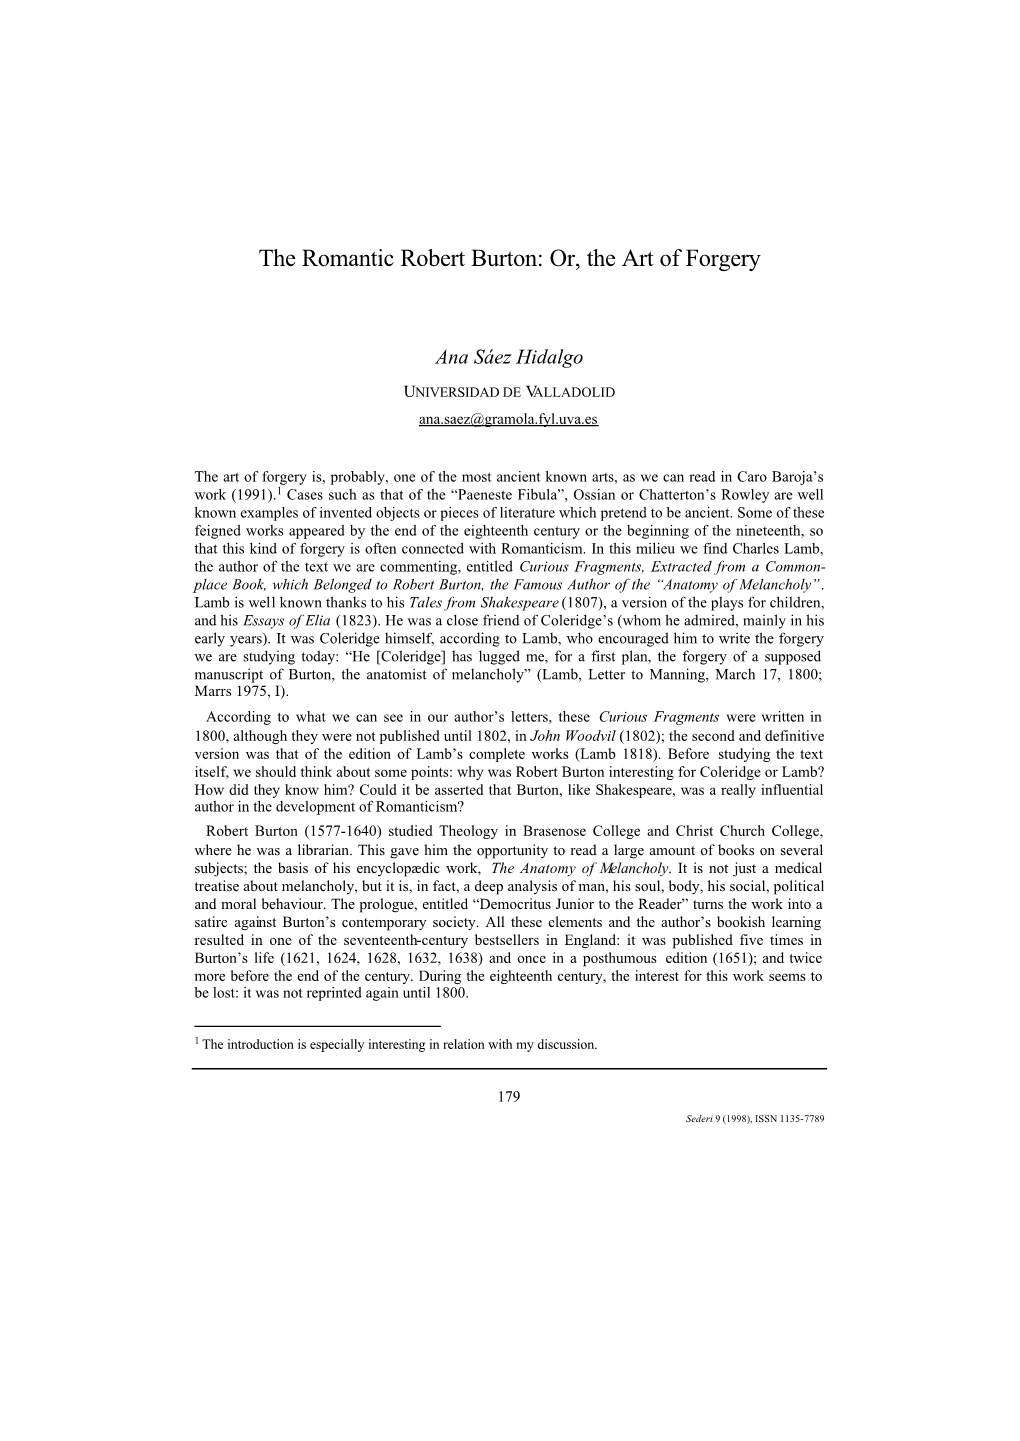 The Romantic Robert Burton: Or, the Art of Forgery